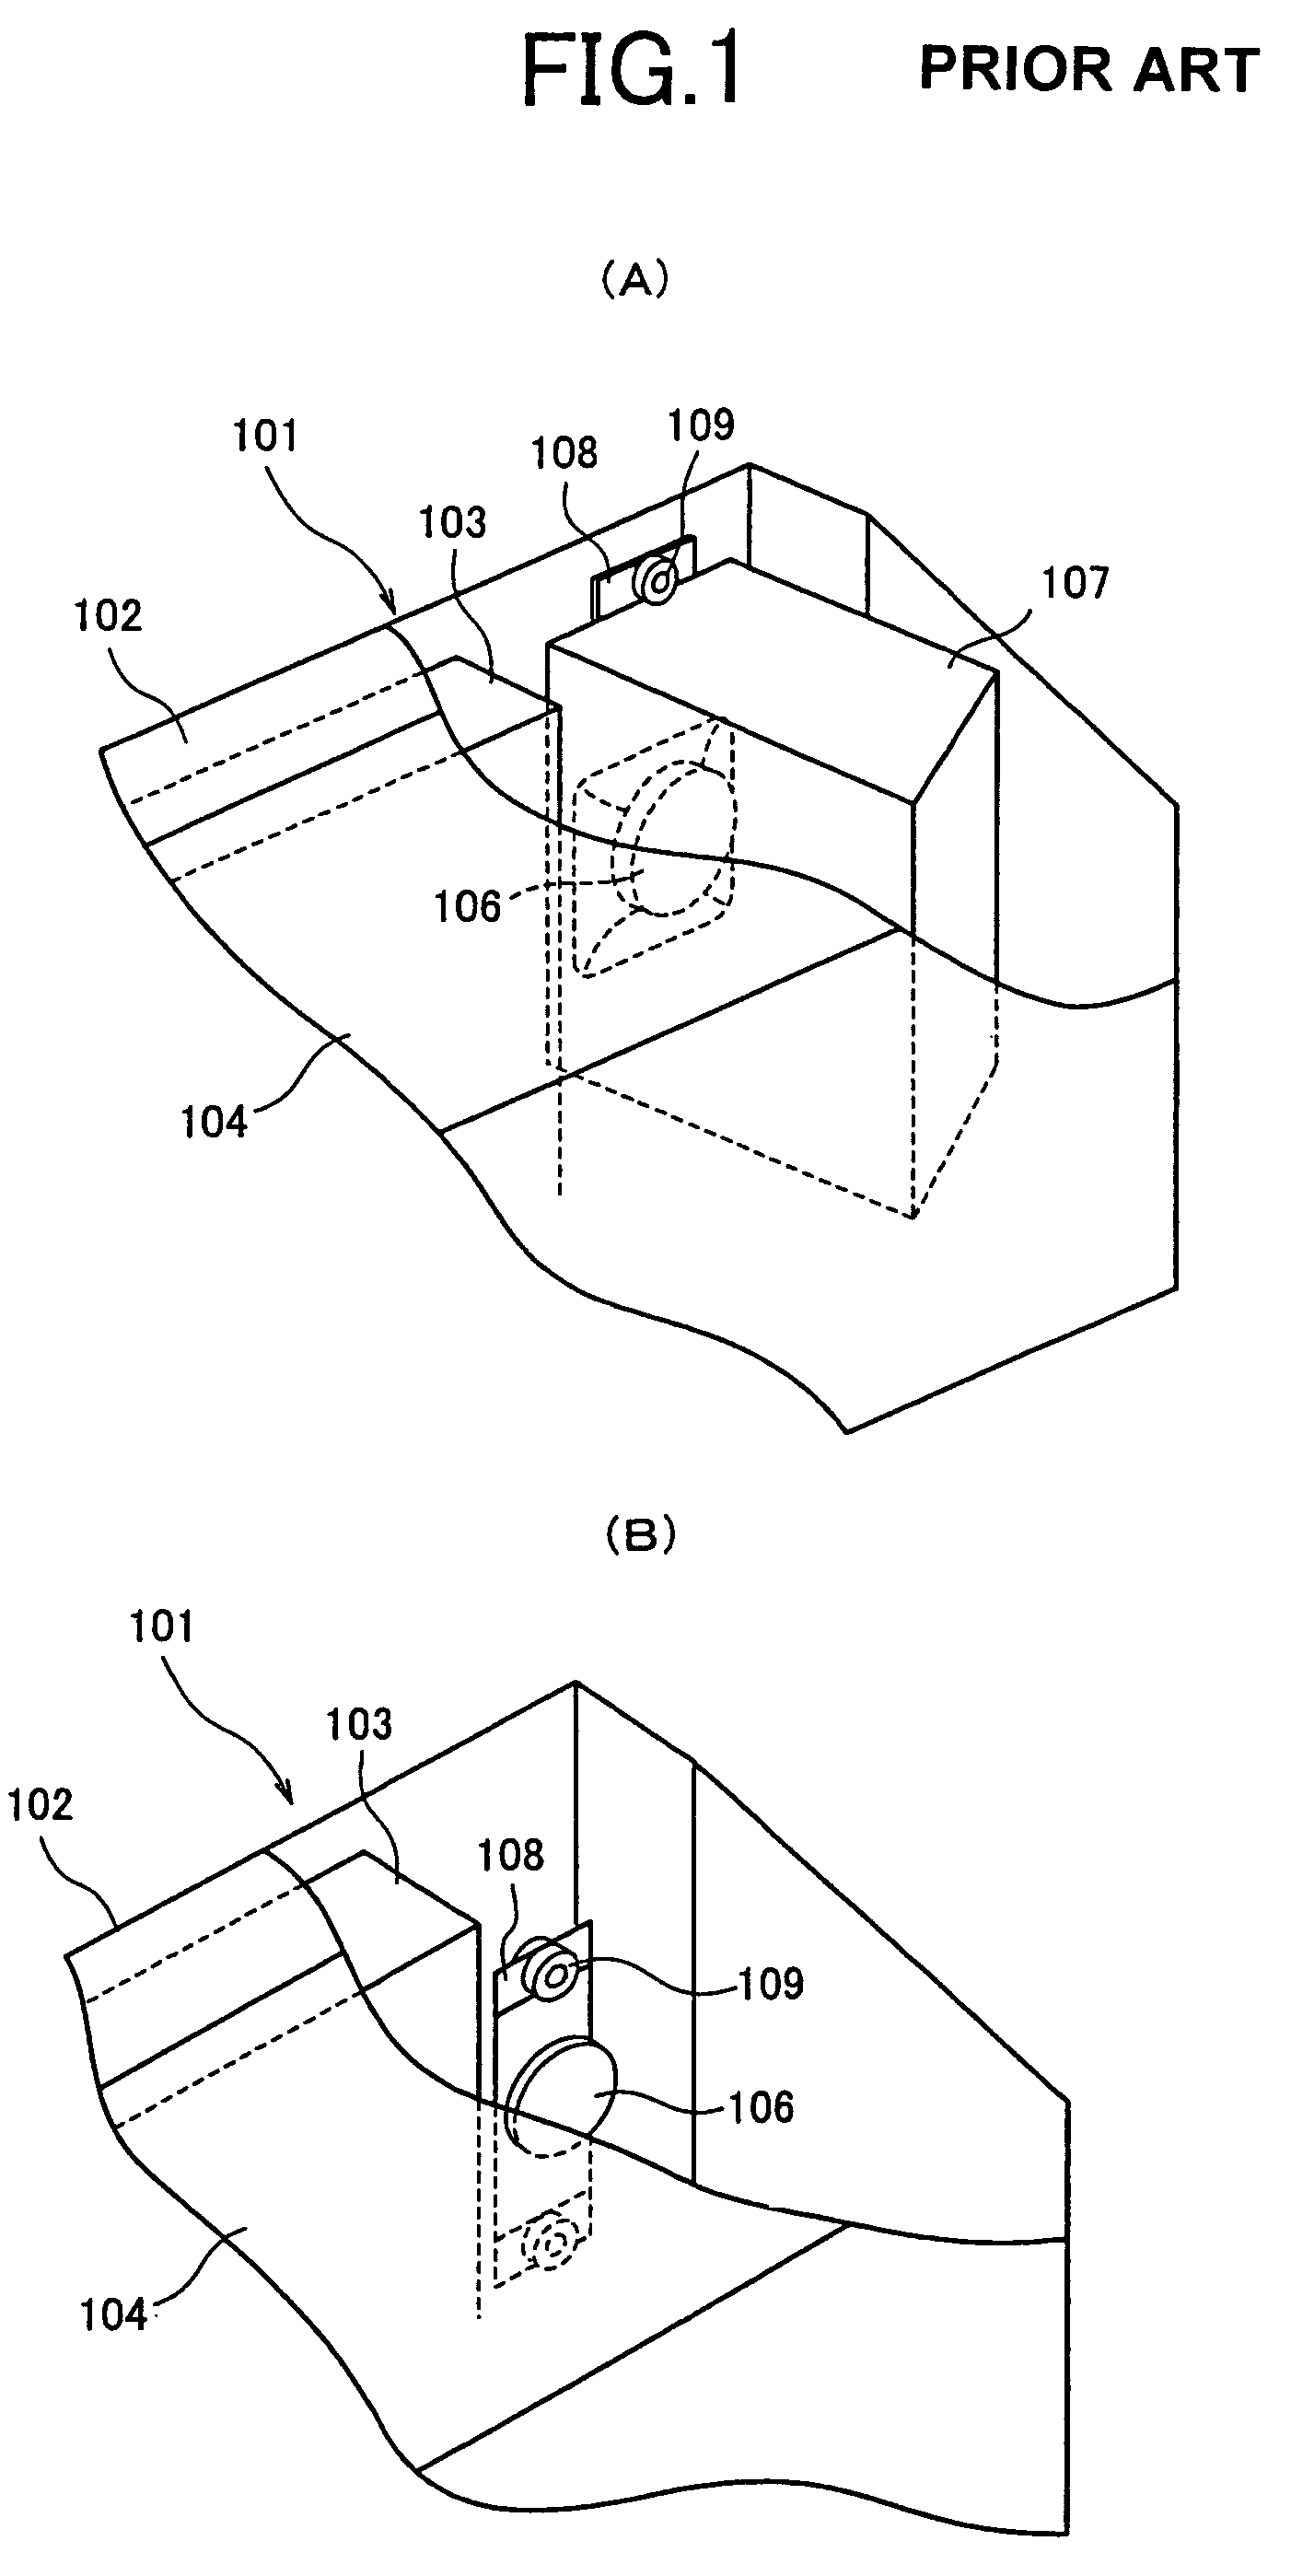 Image display device with built-in loudspeakers